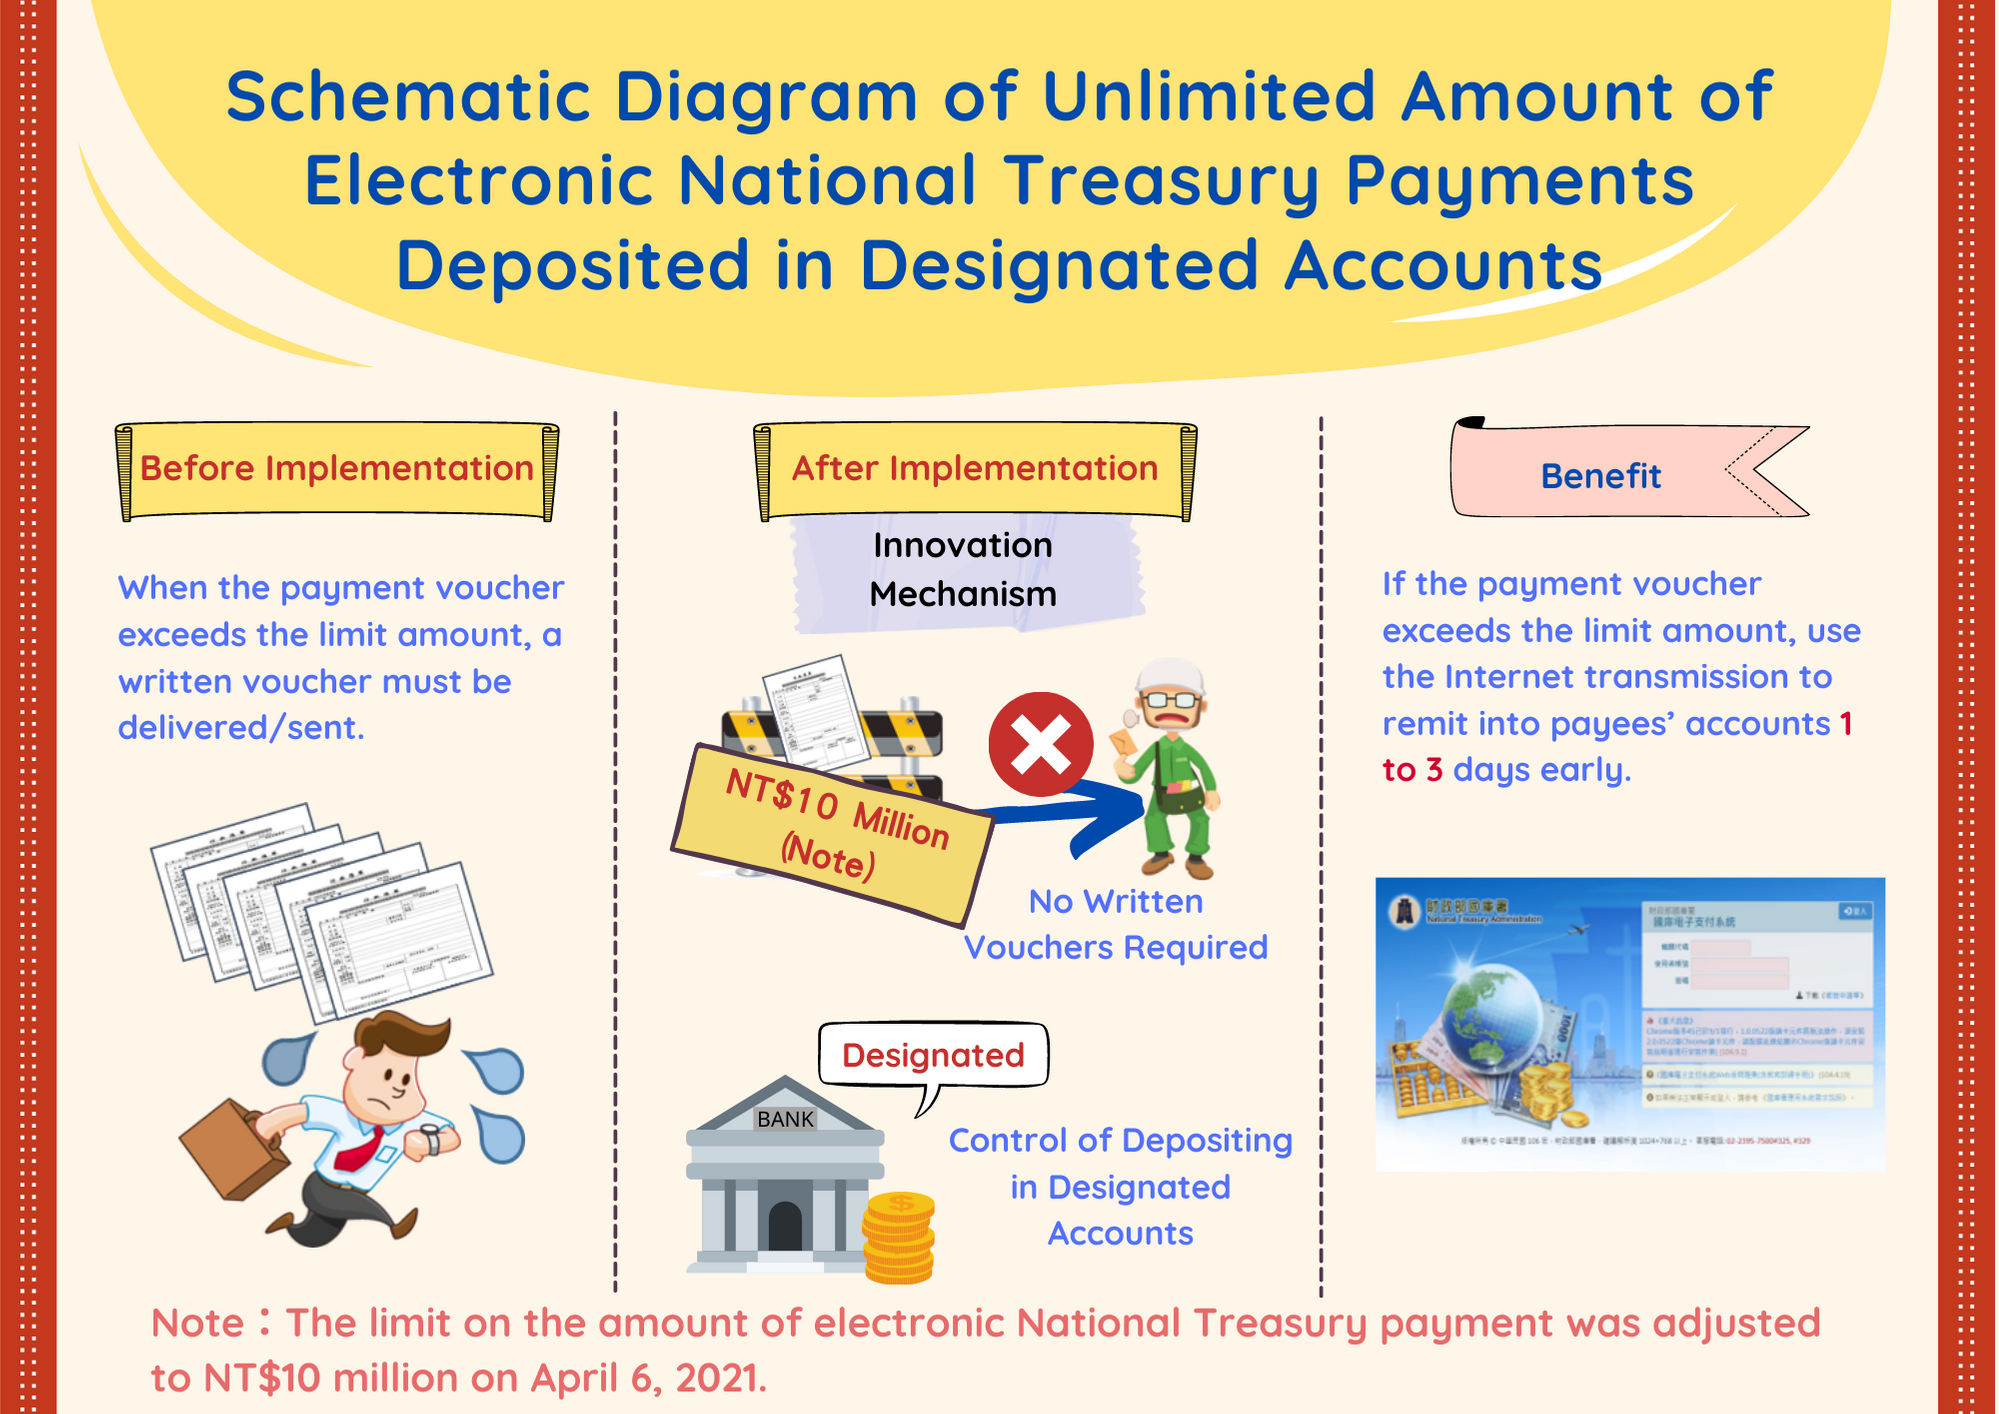 Schematic Diagram of Unlimited Amount of Electronic National Treasury Payments Deposited in Designated Accounts